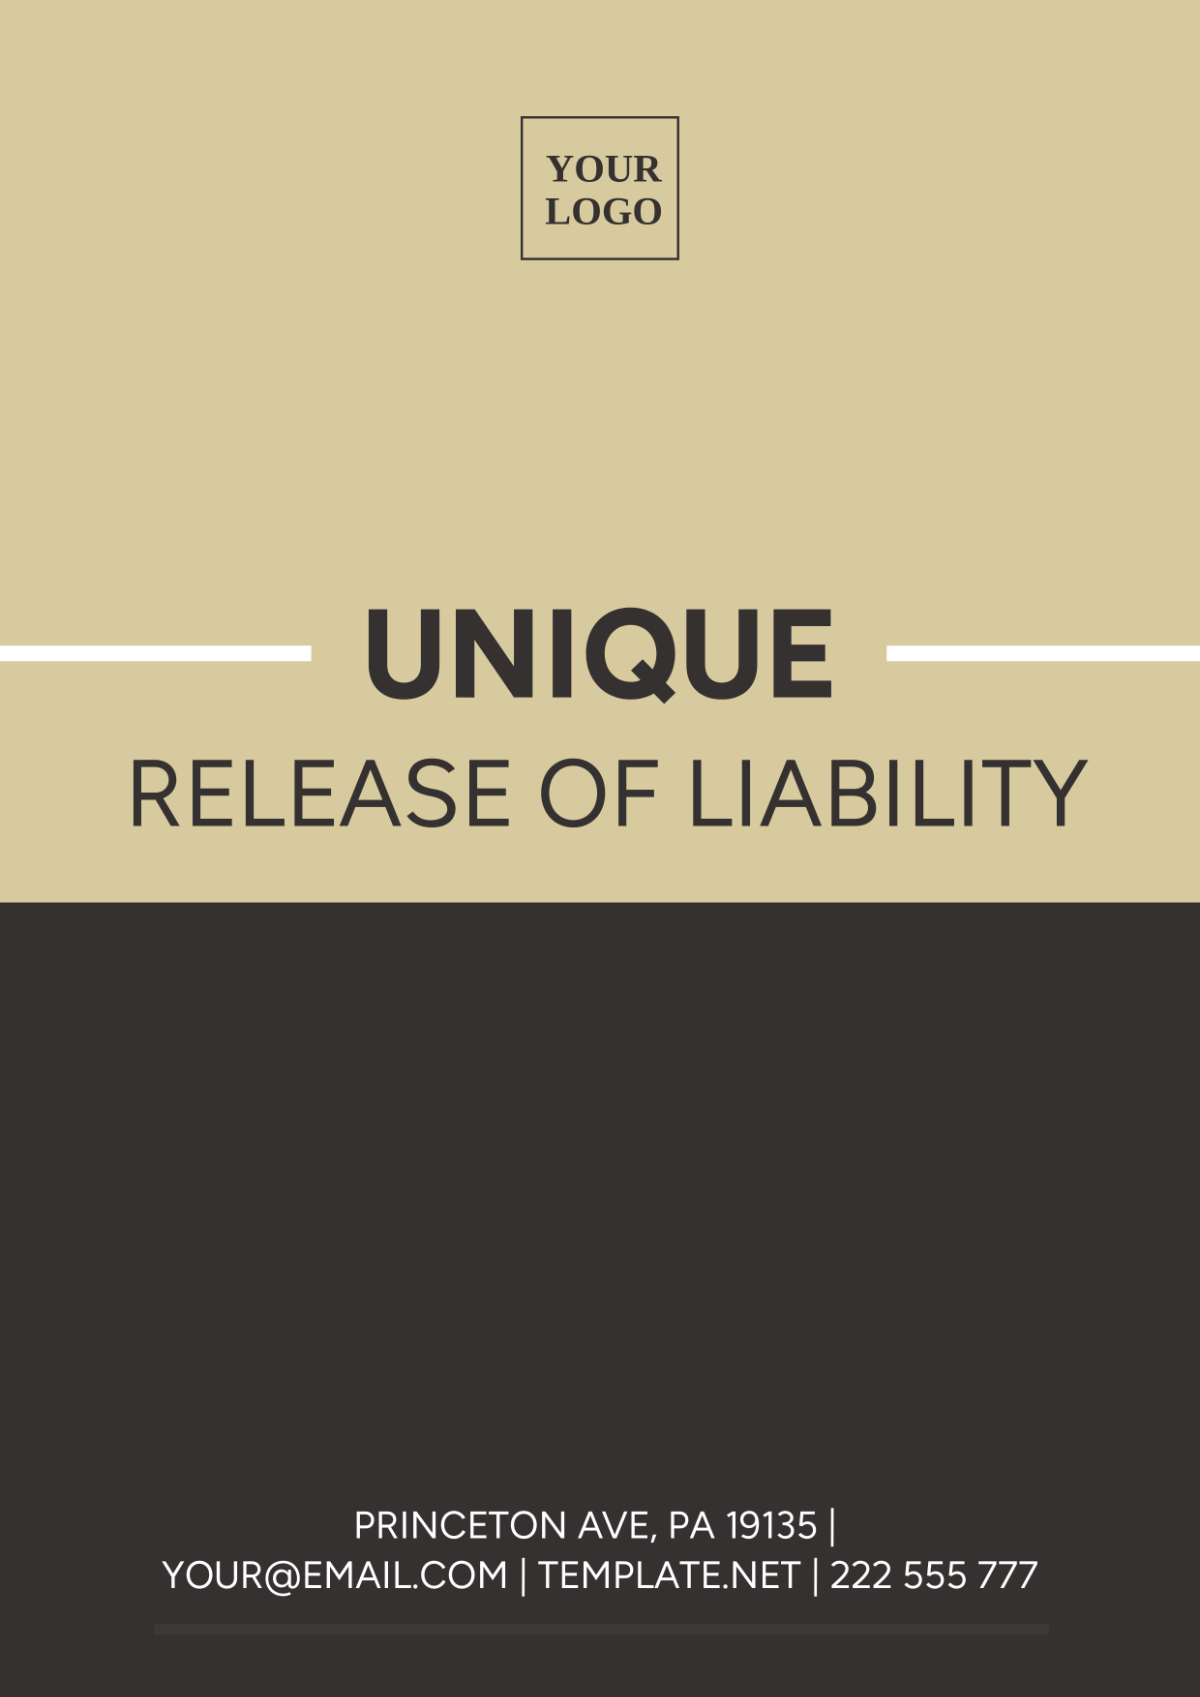 Unique Release of Liability Cover Page